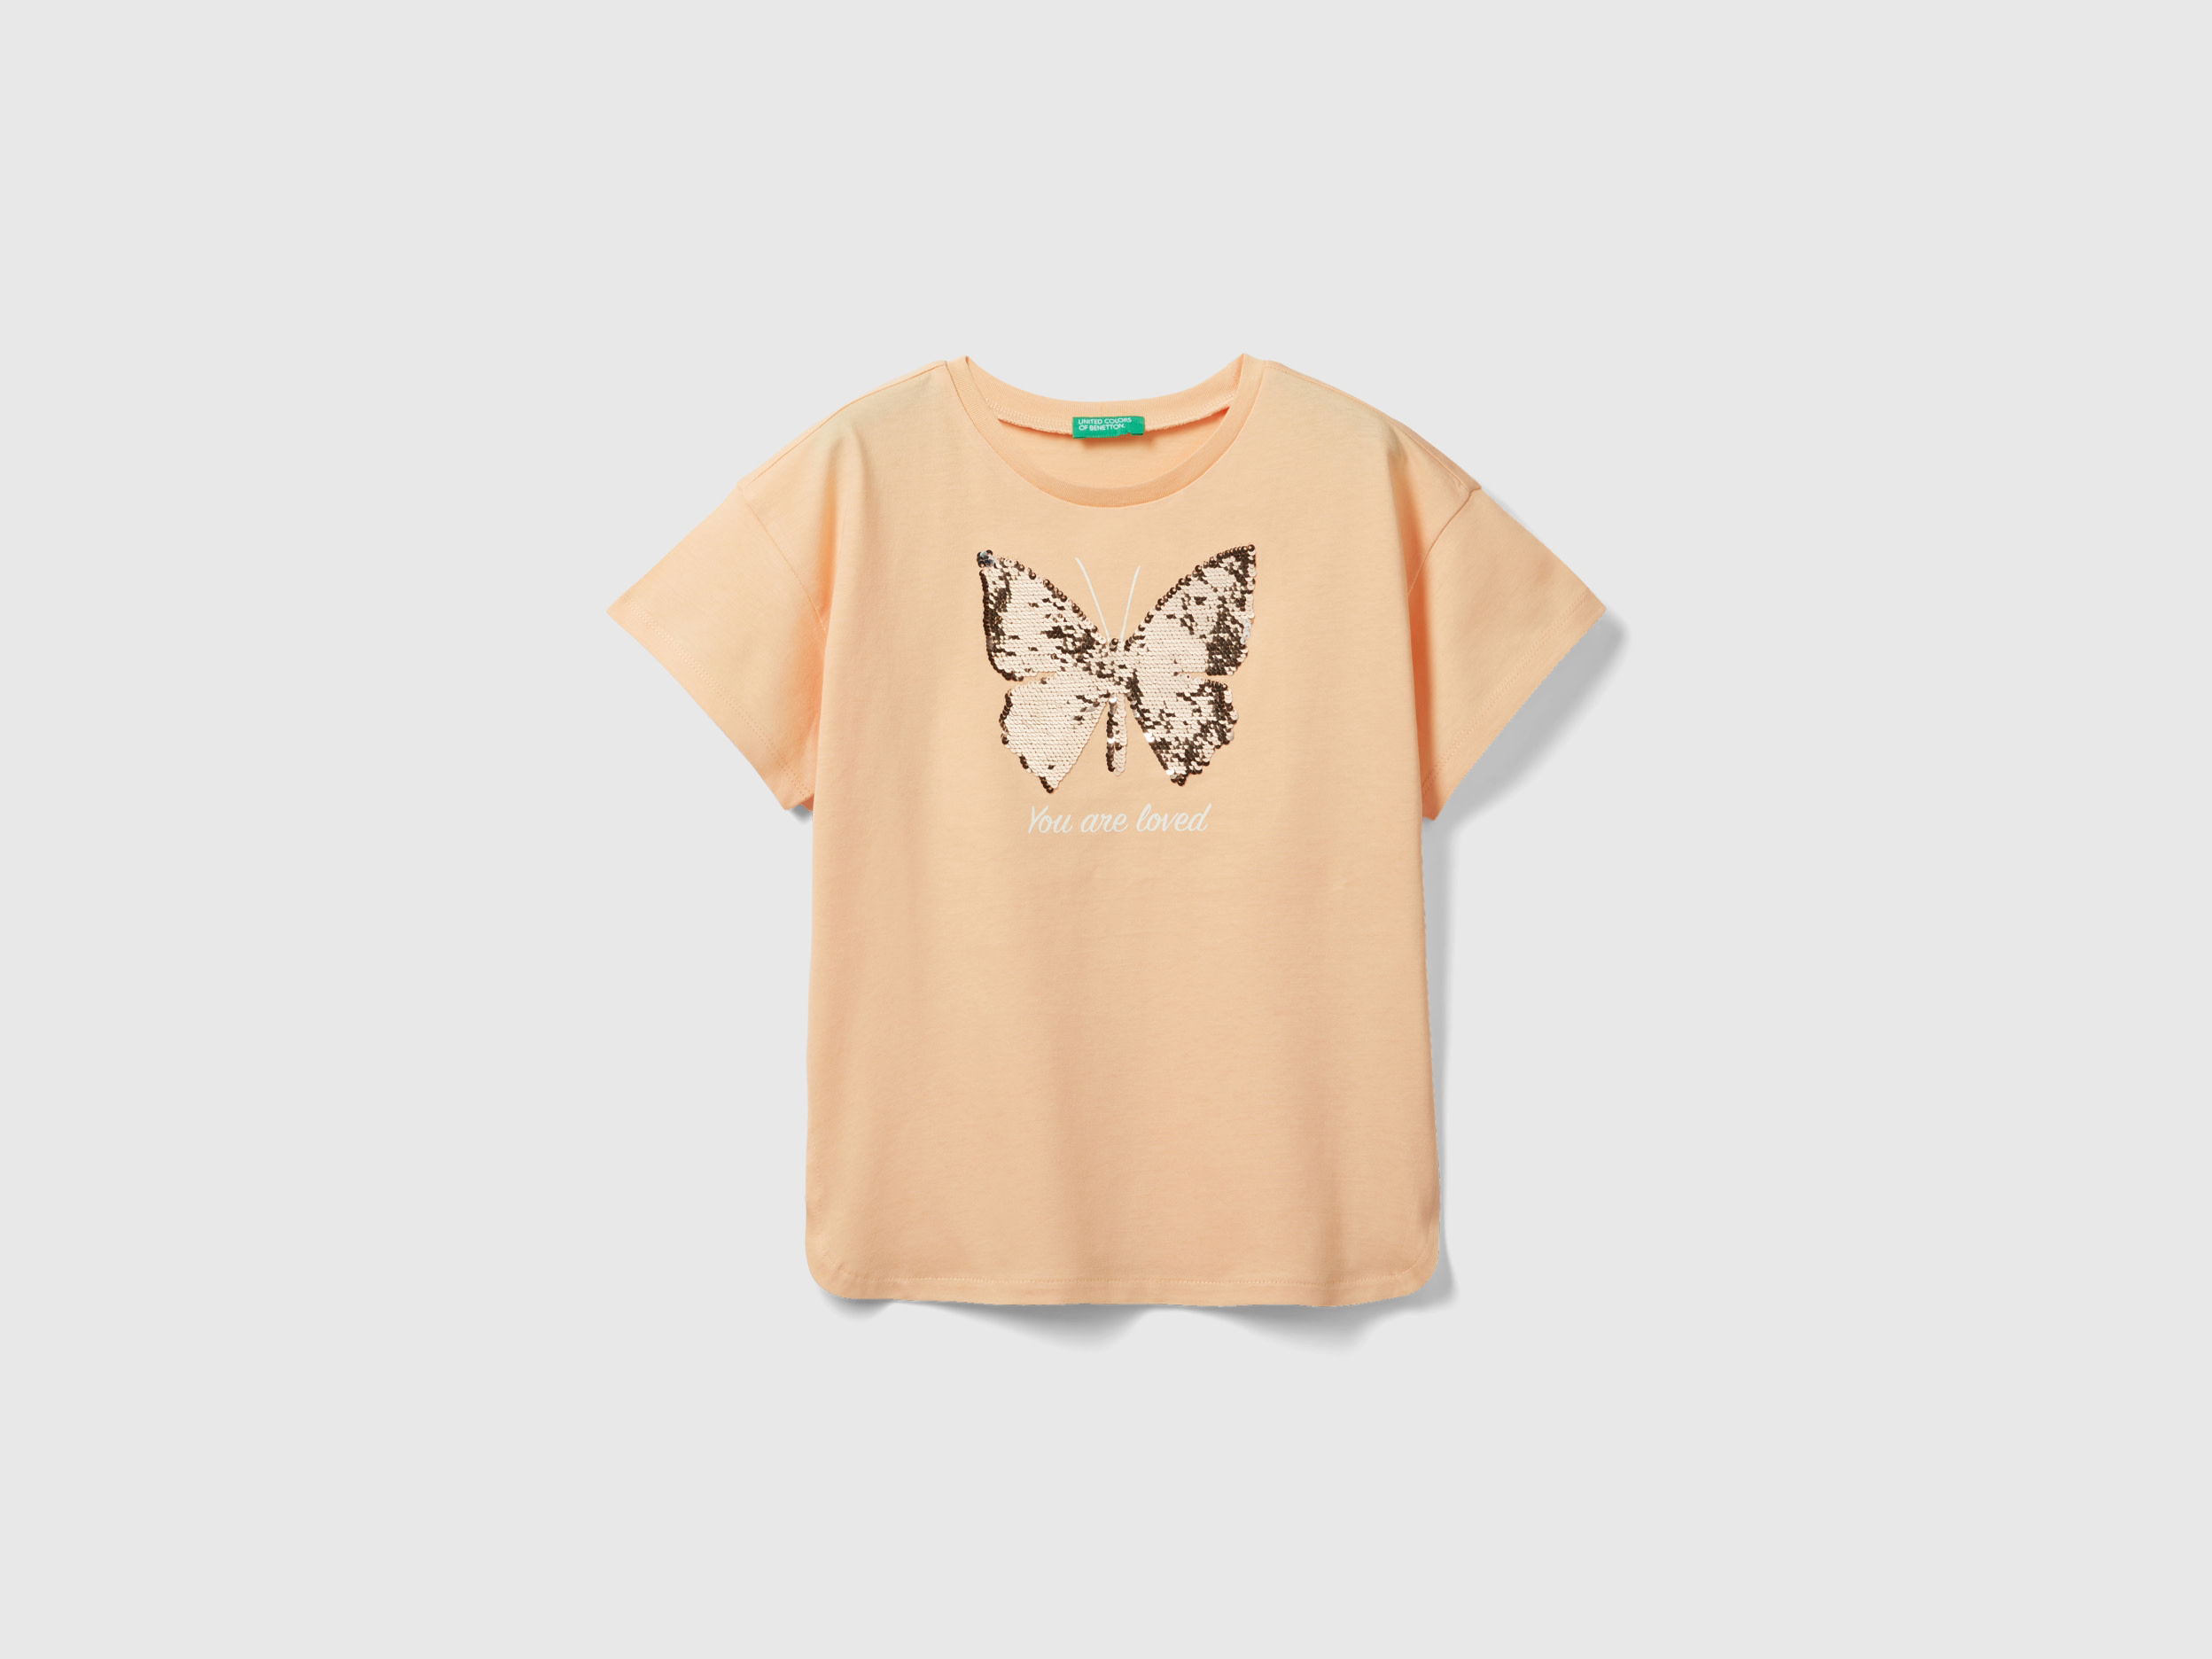 Image of Benetton, T-shirt With Reversible Sequins, size S, Peach, Kids